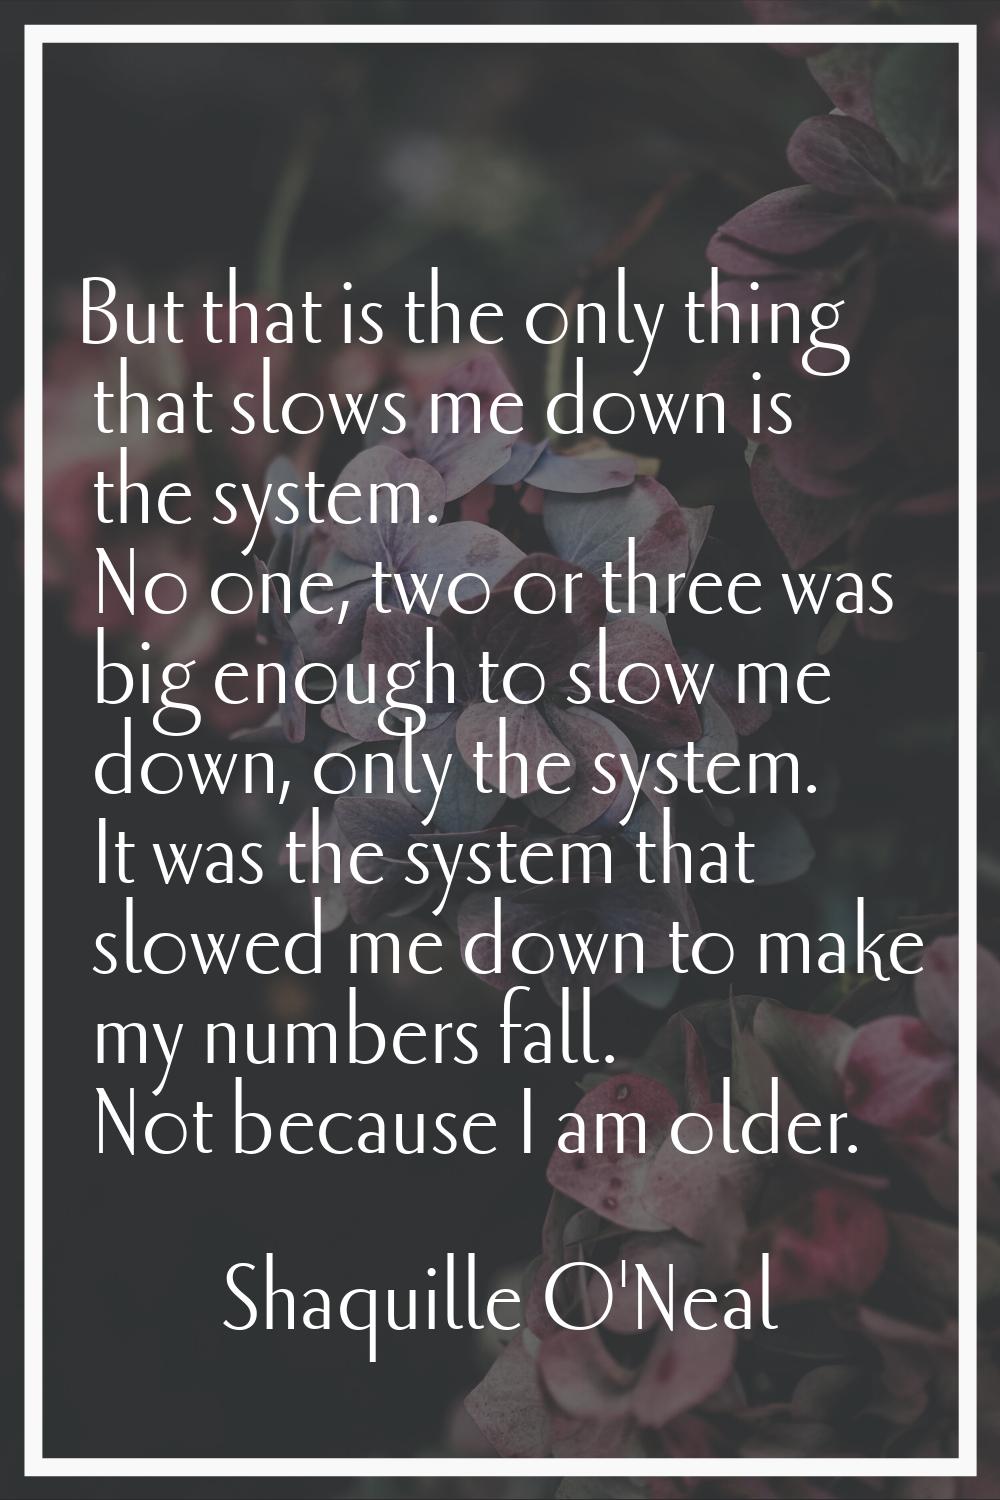 But that is the only thing that slows me down is the system. No one, two or three was big enough to